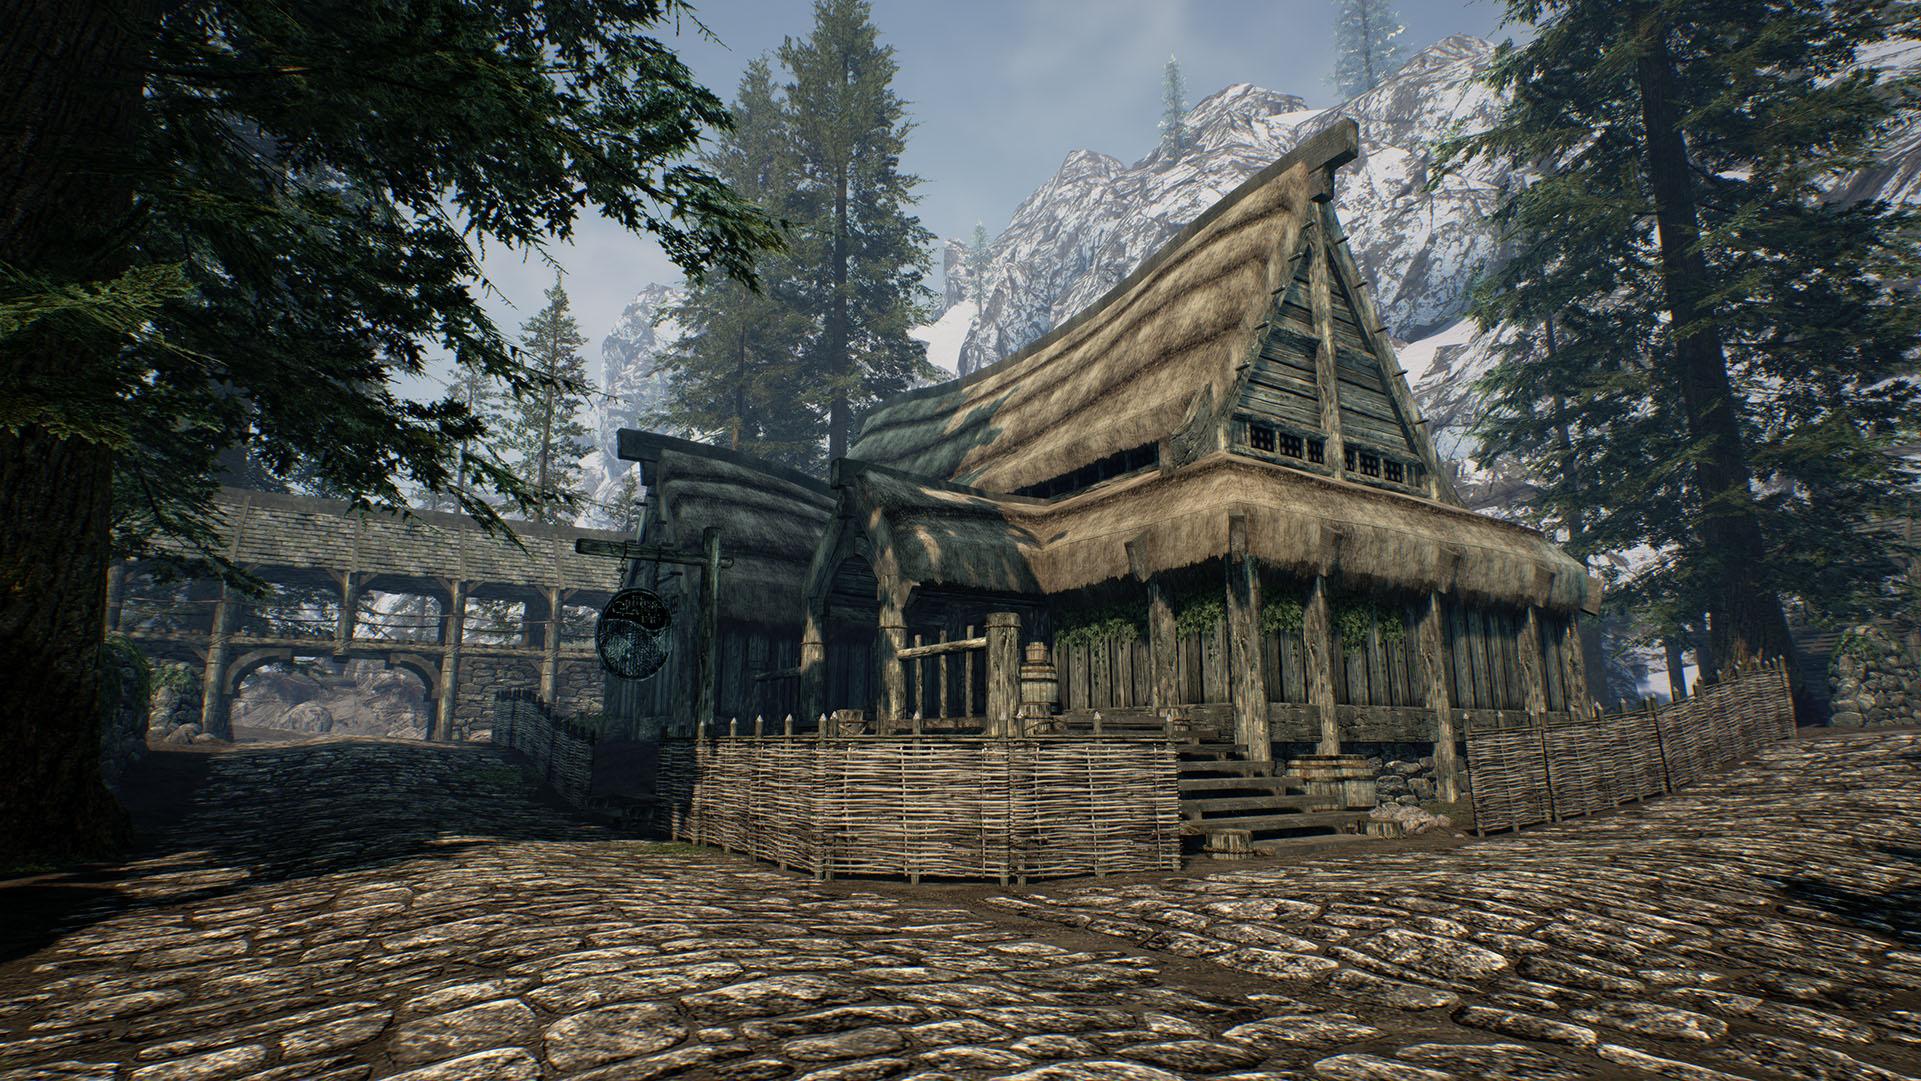 Skyrim has been recreated in Unreal Engine 5 – and it looks